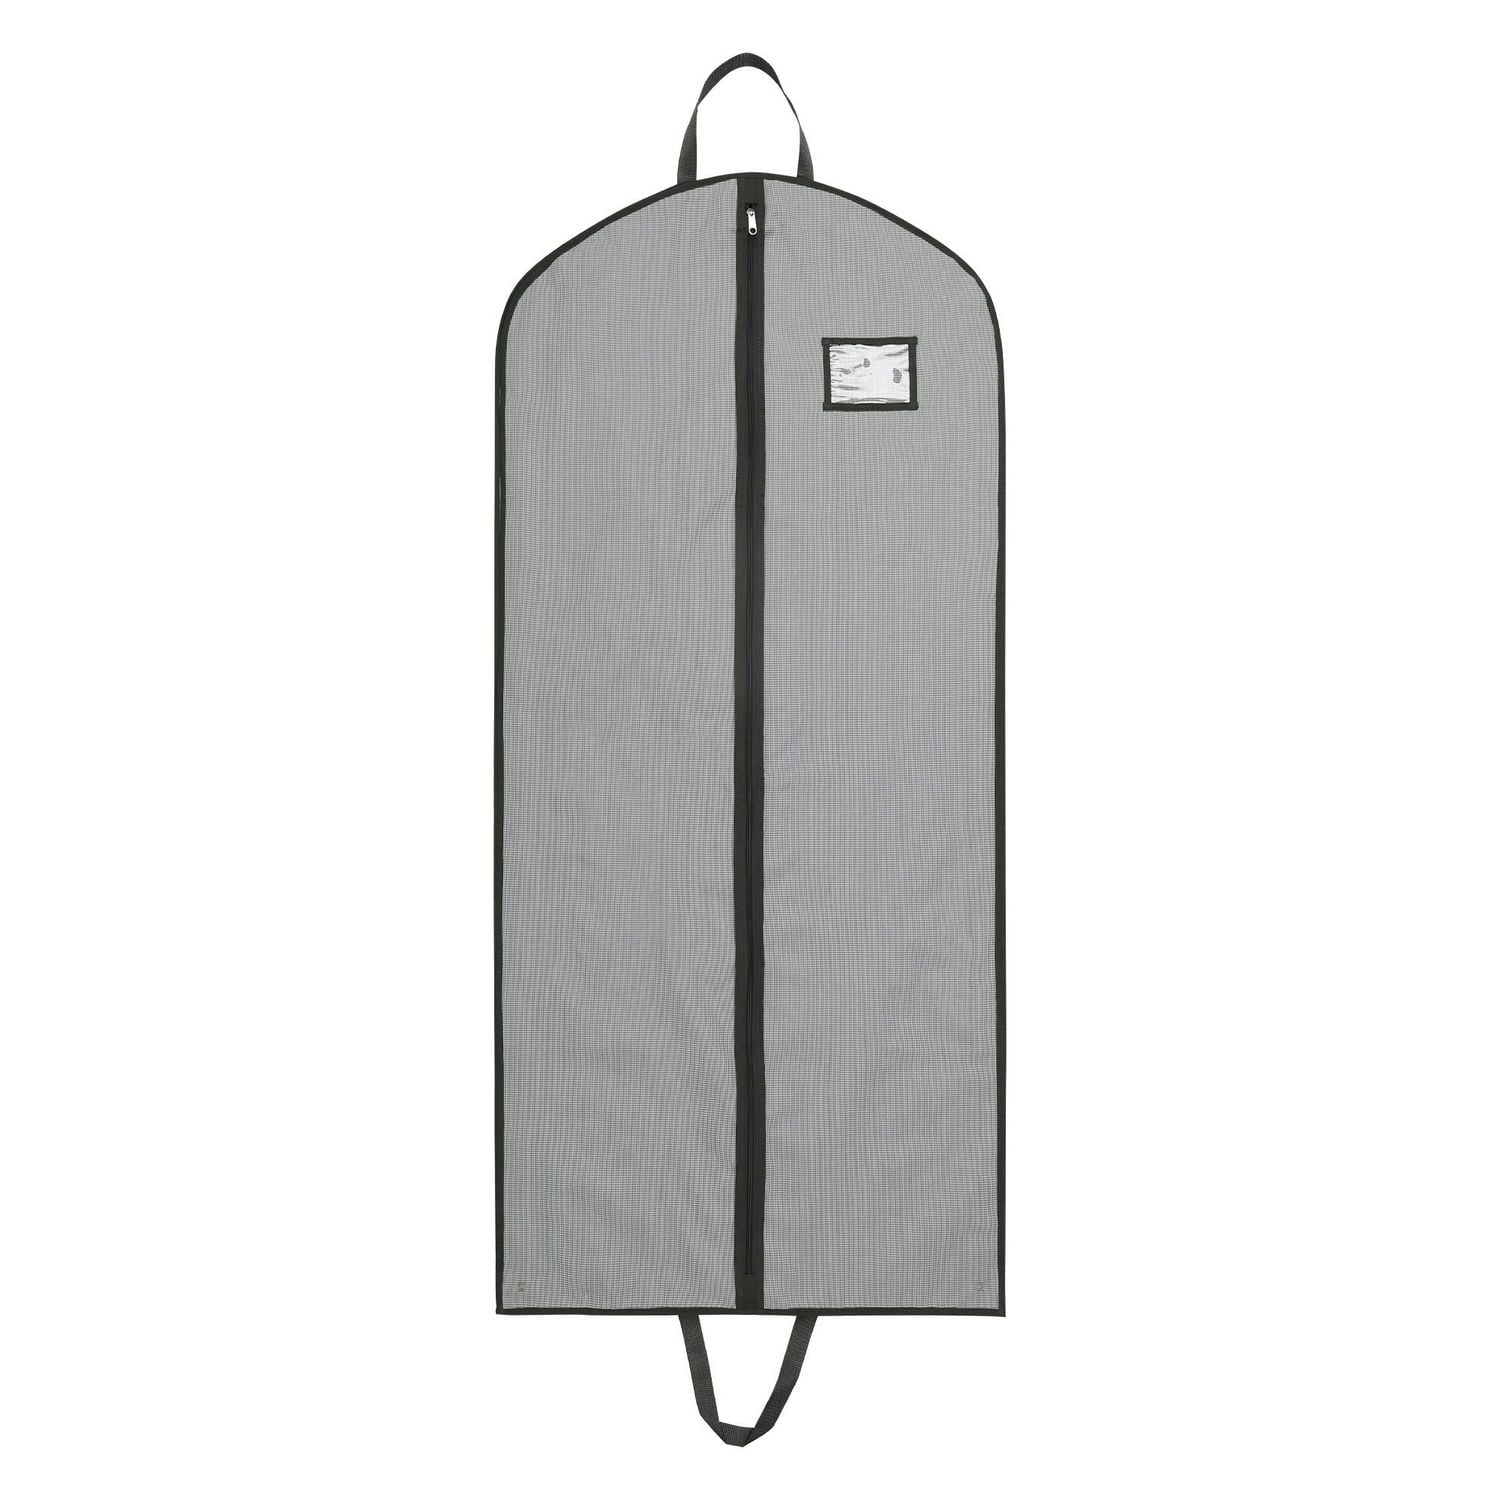 https://www.walmart.ca/en/ip/mainstays-garment-bag-for-travel-and-storage-breathable-with-zipper-carry-handles-for-folding-for-suits-dresses-coats-grey-grey/6000197075183